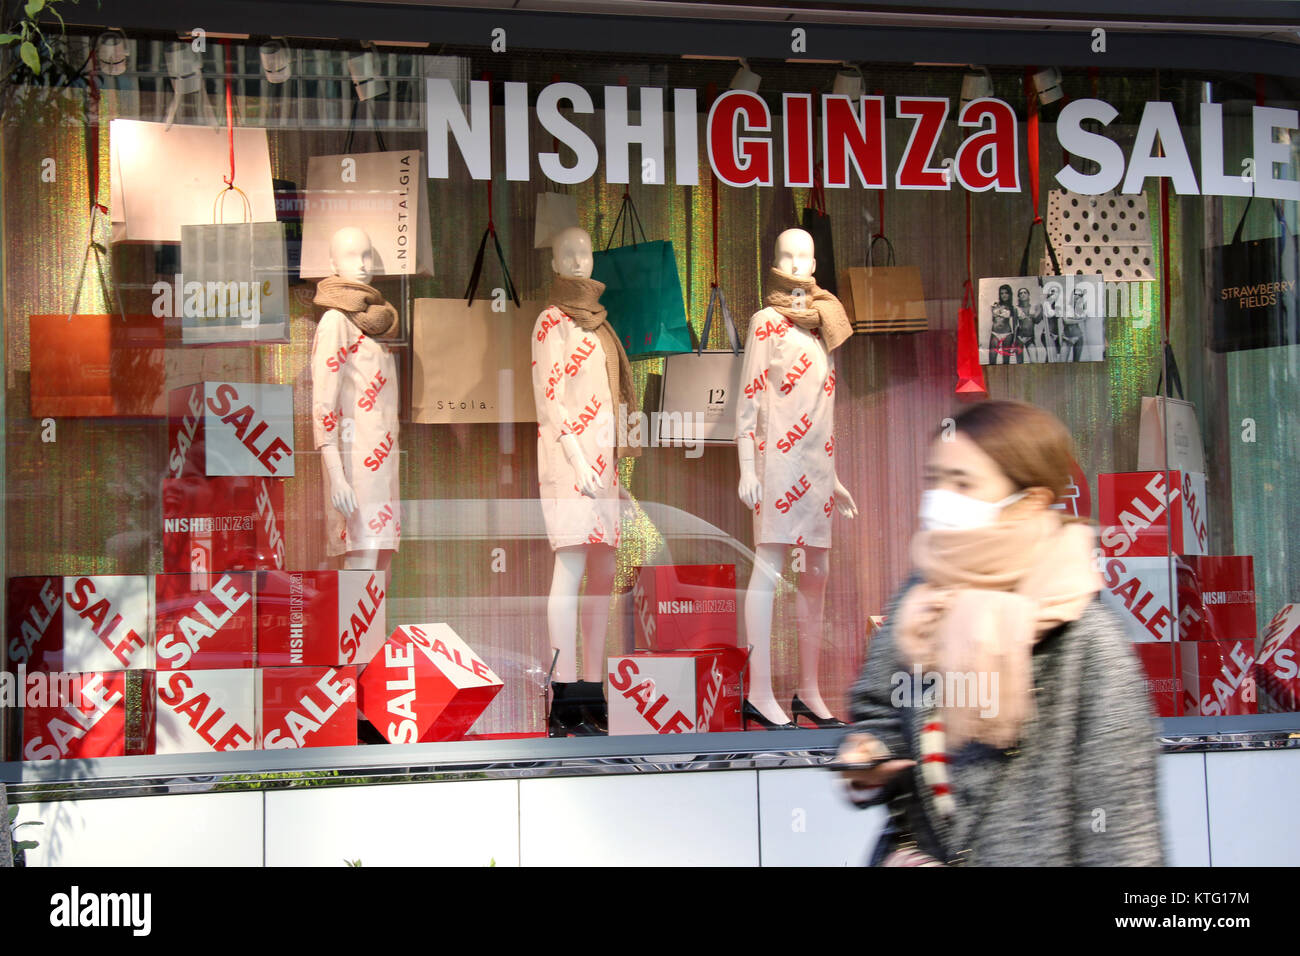 Tokyo, Japan. 26th Dec, 2017. A pedestrian passes before an aparel shop in Tokyo on Tuesday, December 26, 2017. Japan's consumer price index rose 0.9 percent in November, increasing 11th consecutive month, the government announced on December 26. Credit: Yoshio Tsunoda/AFLO/Alamy Live News Stock Photo